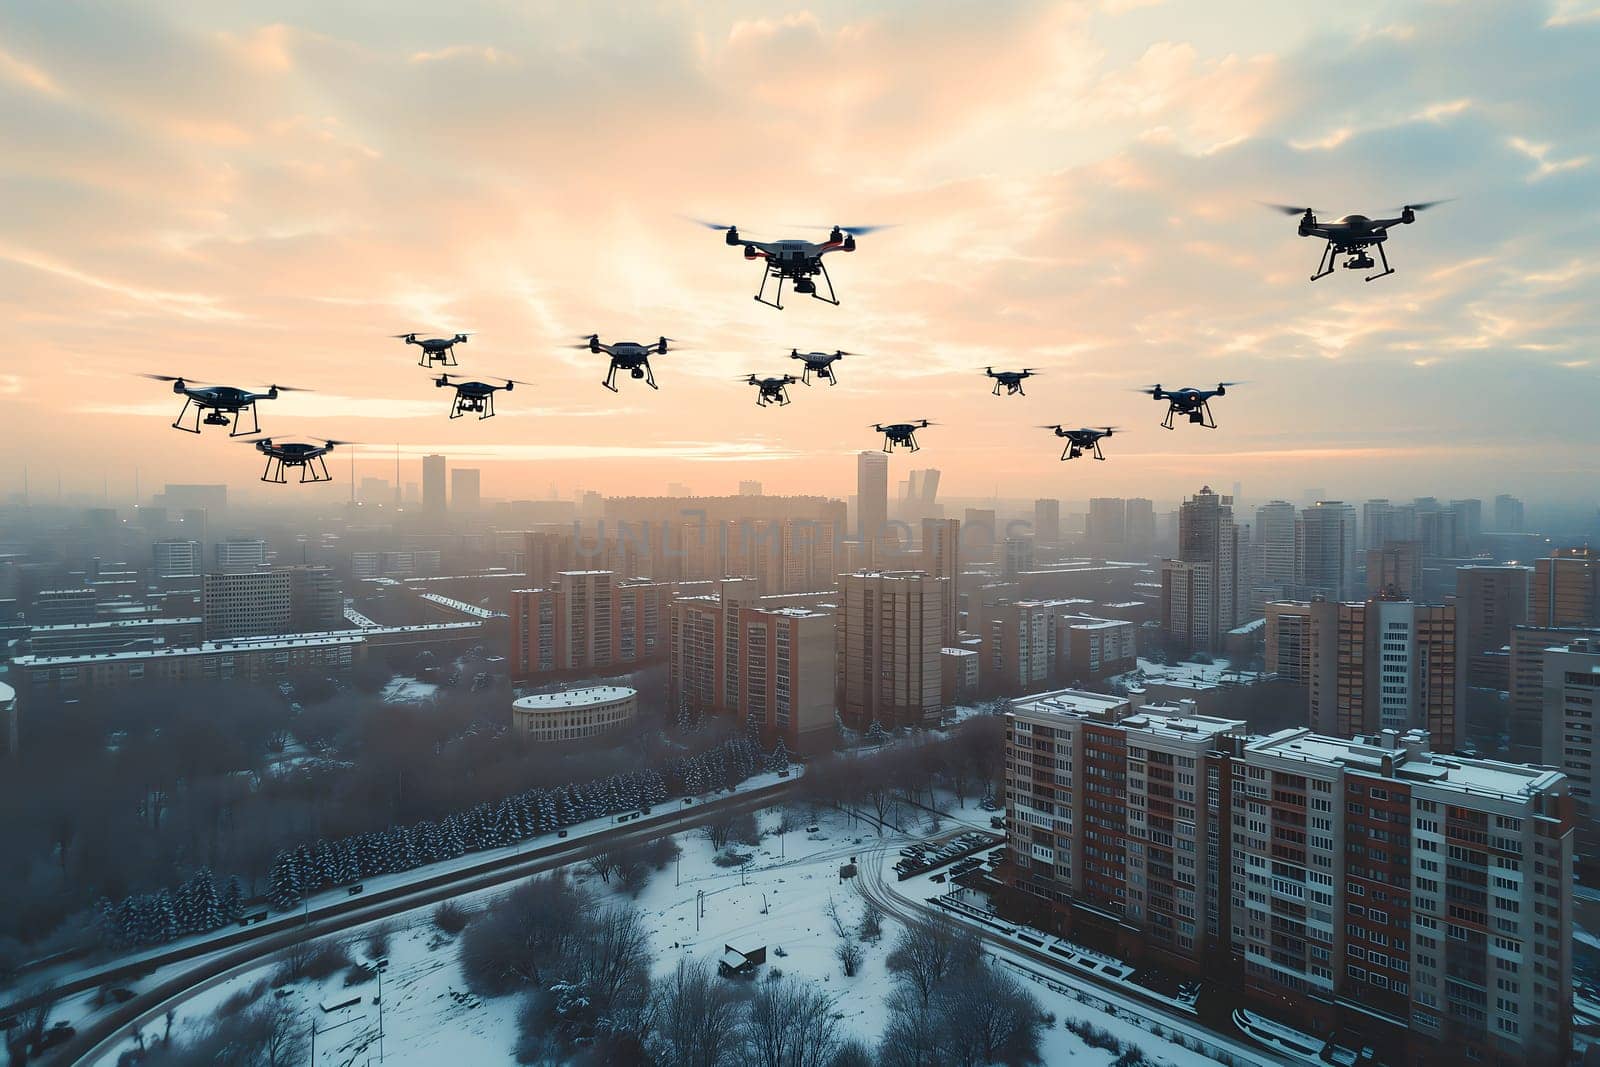 Group of drones over city at winter morning. Neural network generated image. Not based on any actual scene or pattern.